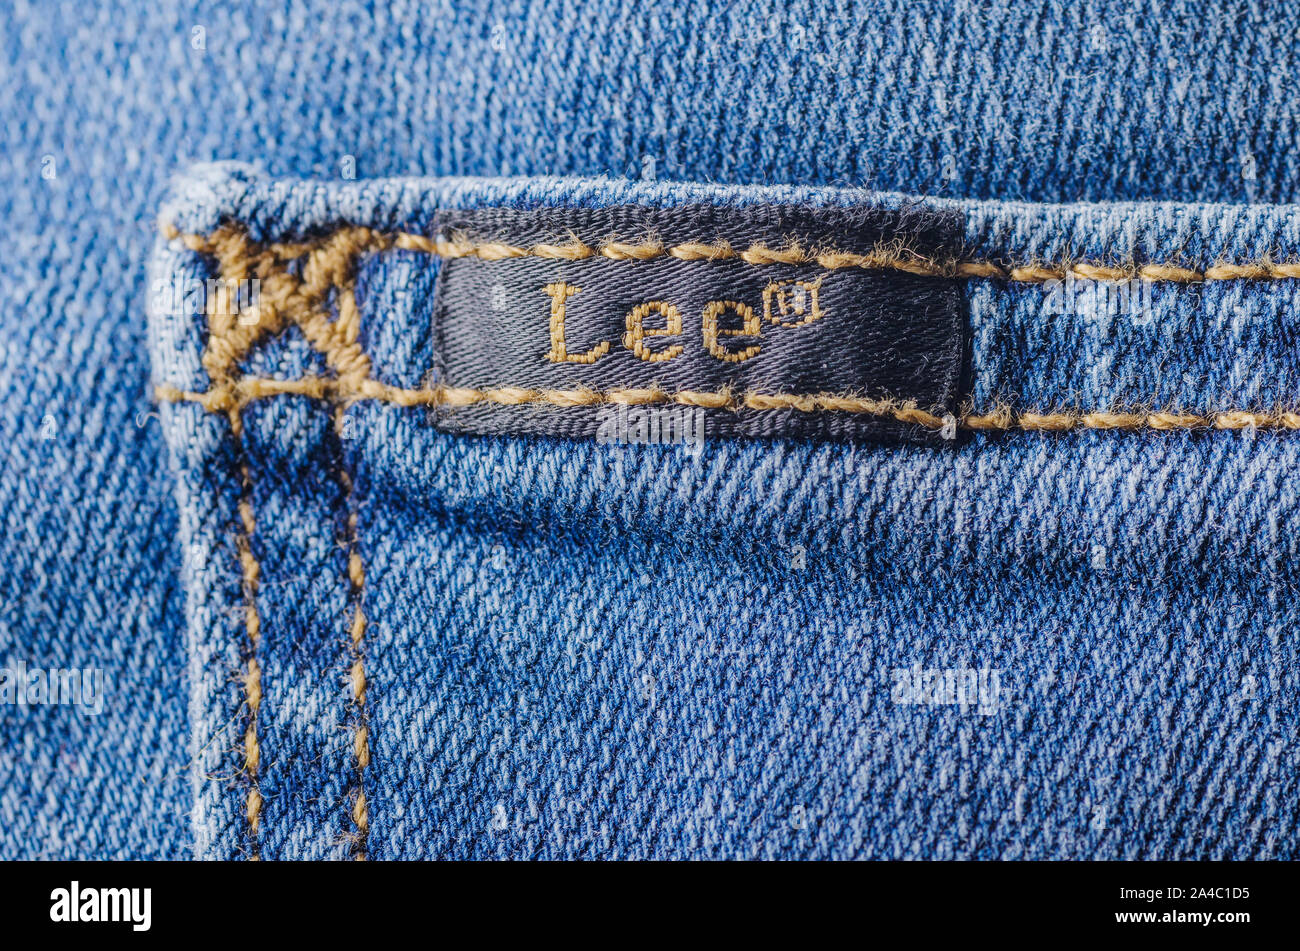 Closeup of Lee label on clothes Stock Photo - Alamy